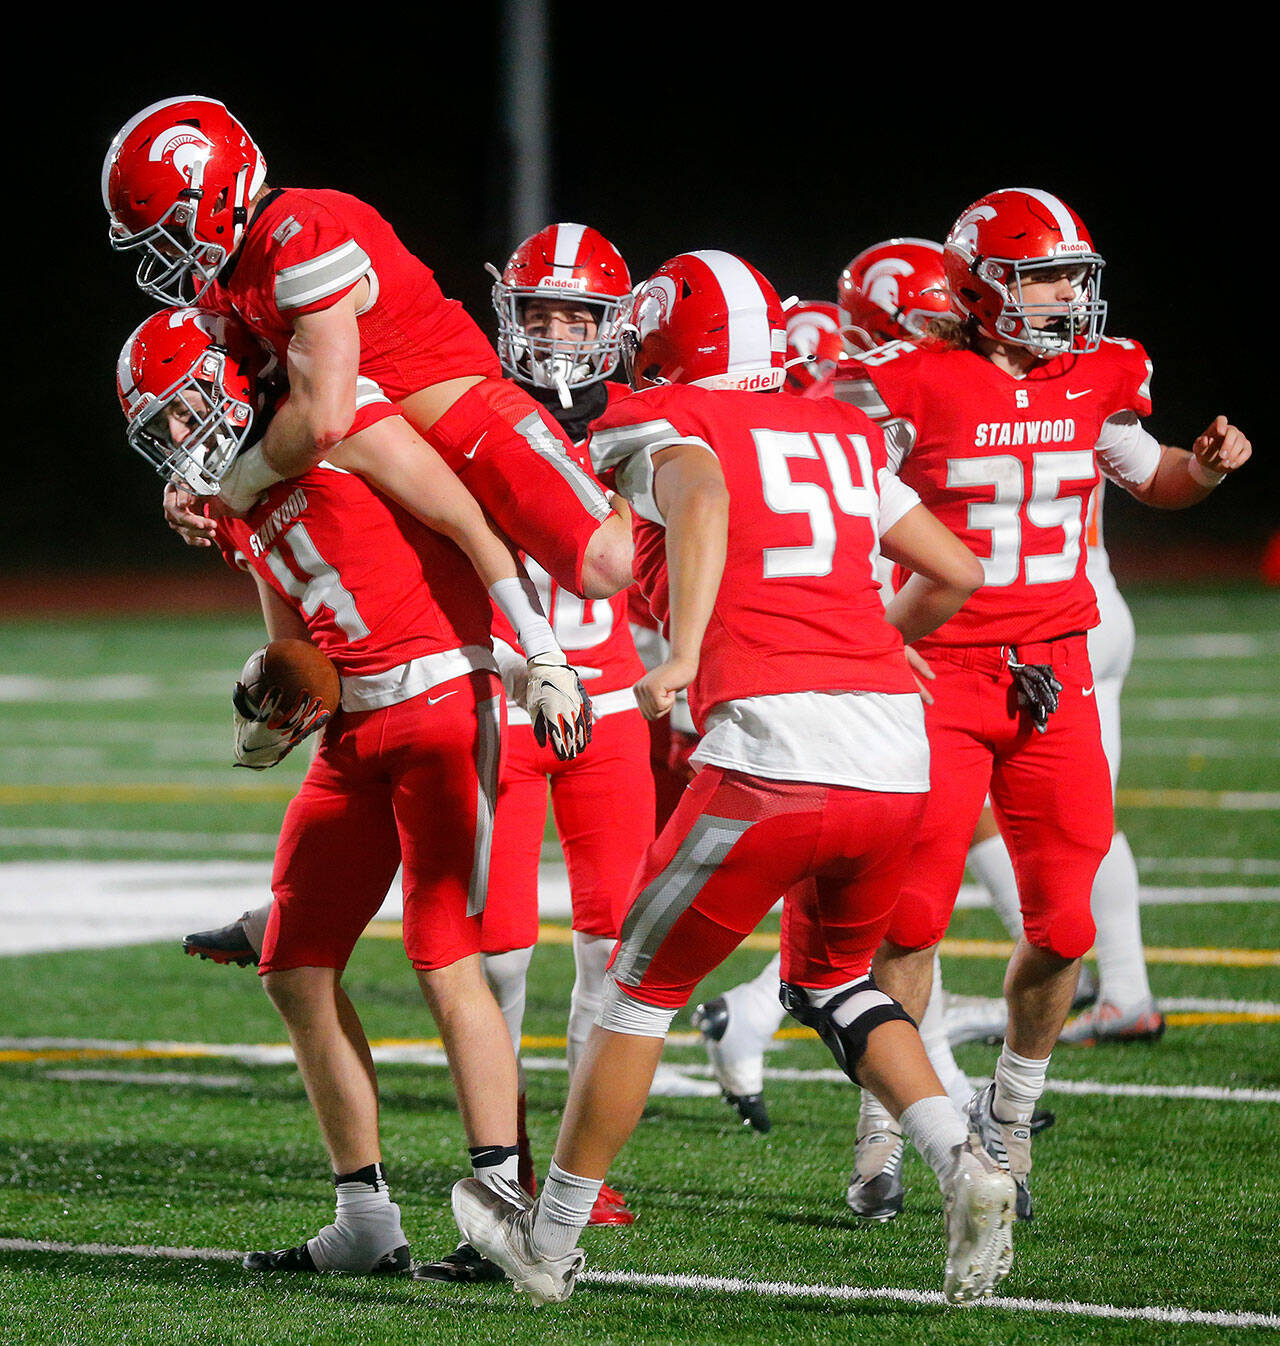 Stanwood’s Gary Grisham is swarmed by teammates after picking off a pass against Lakes on Nov. 4 at Stanwood High School. (Ryan Berry / The Herald)